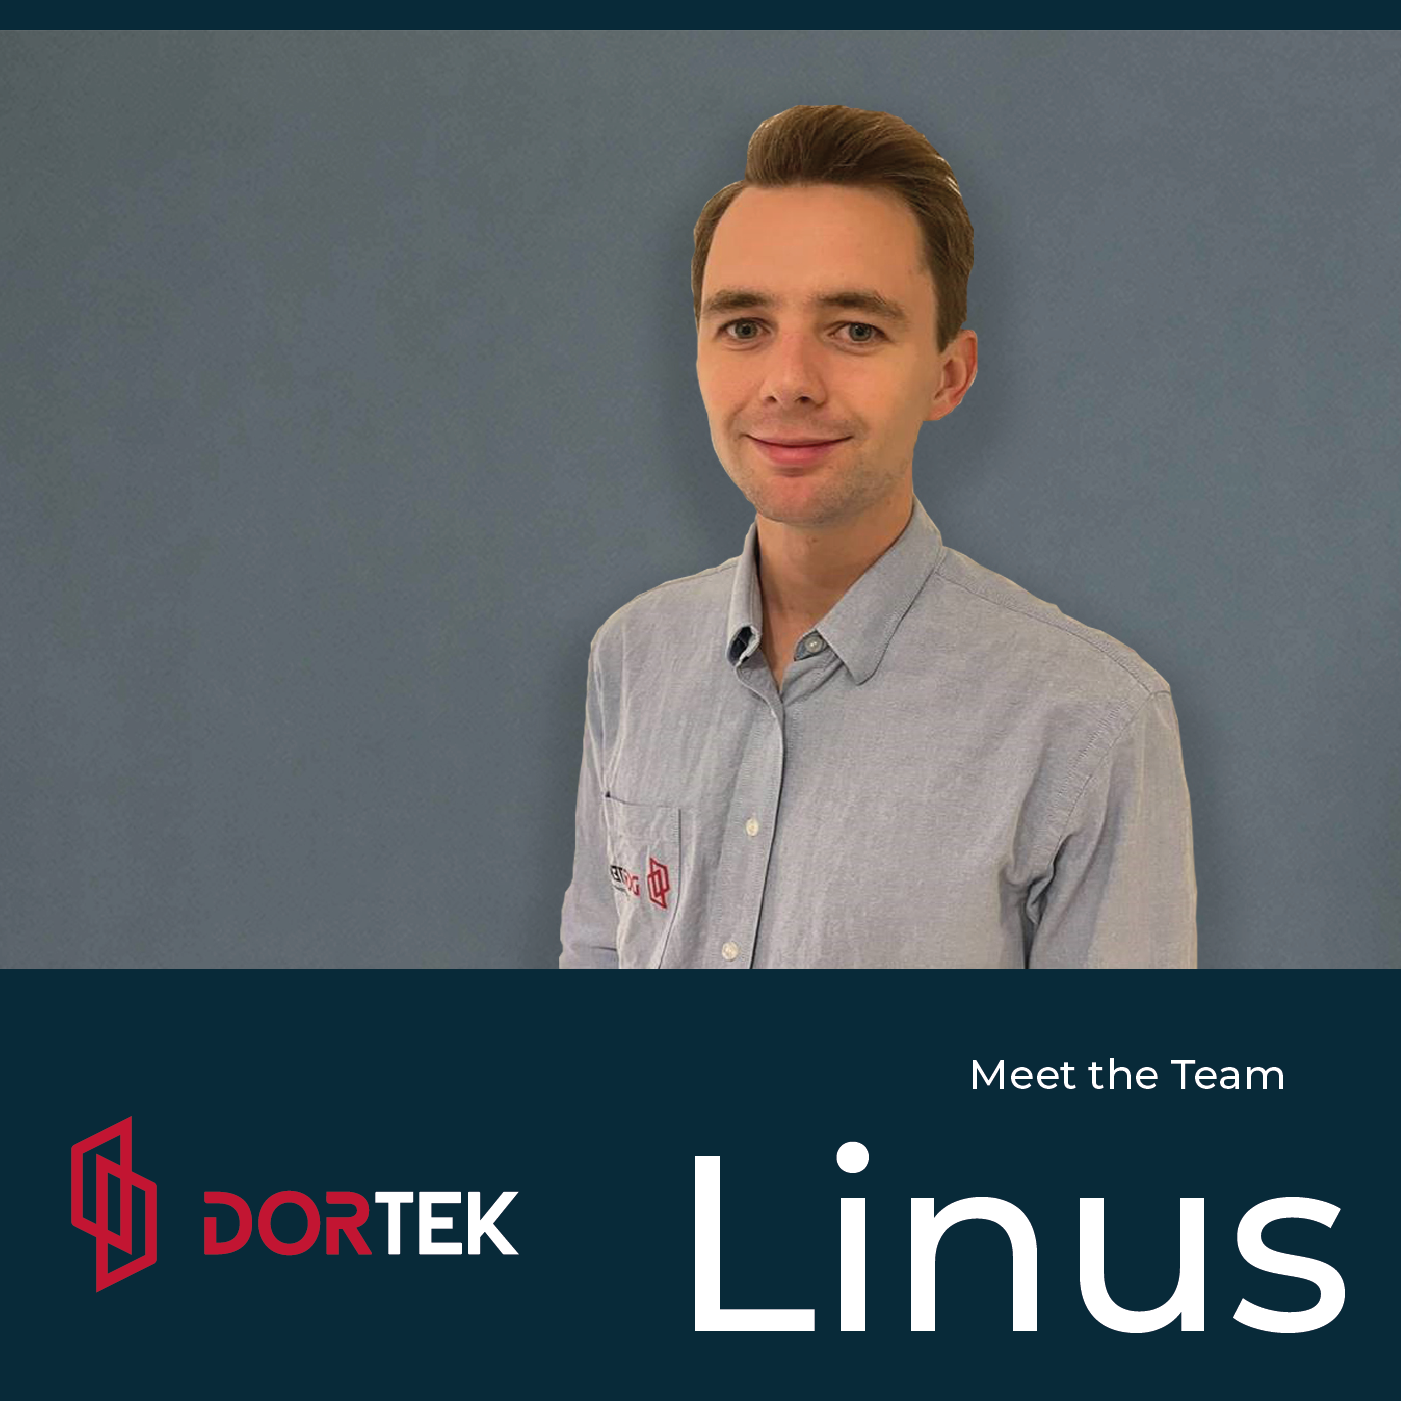 Meet our process and quality engineer, Linus